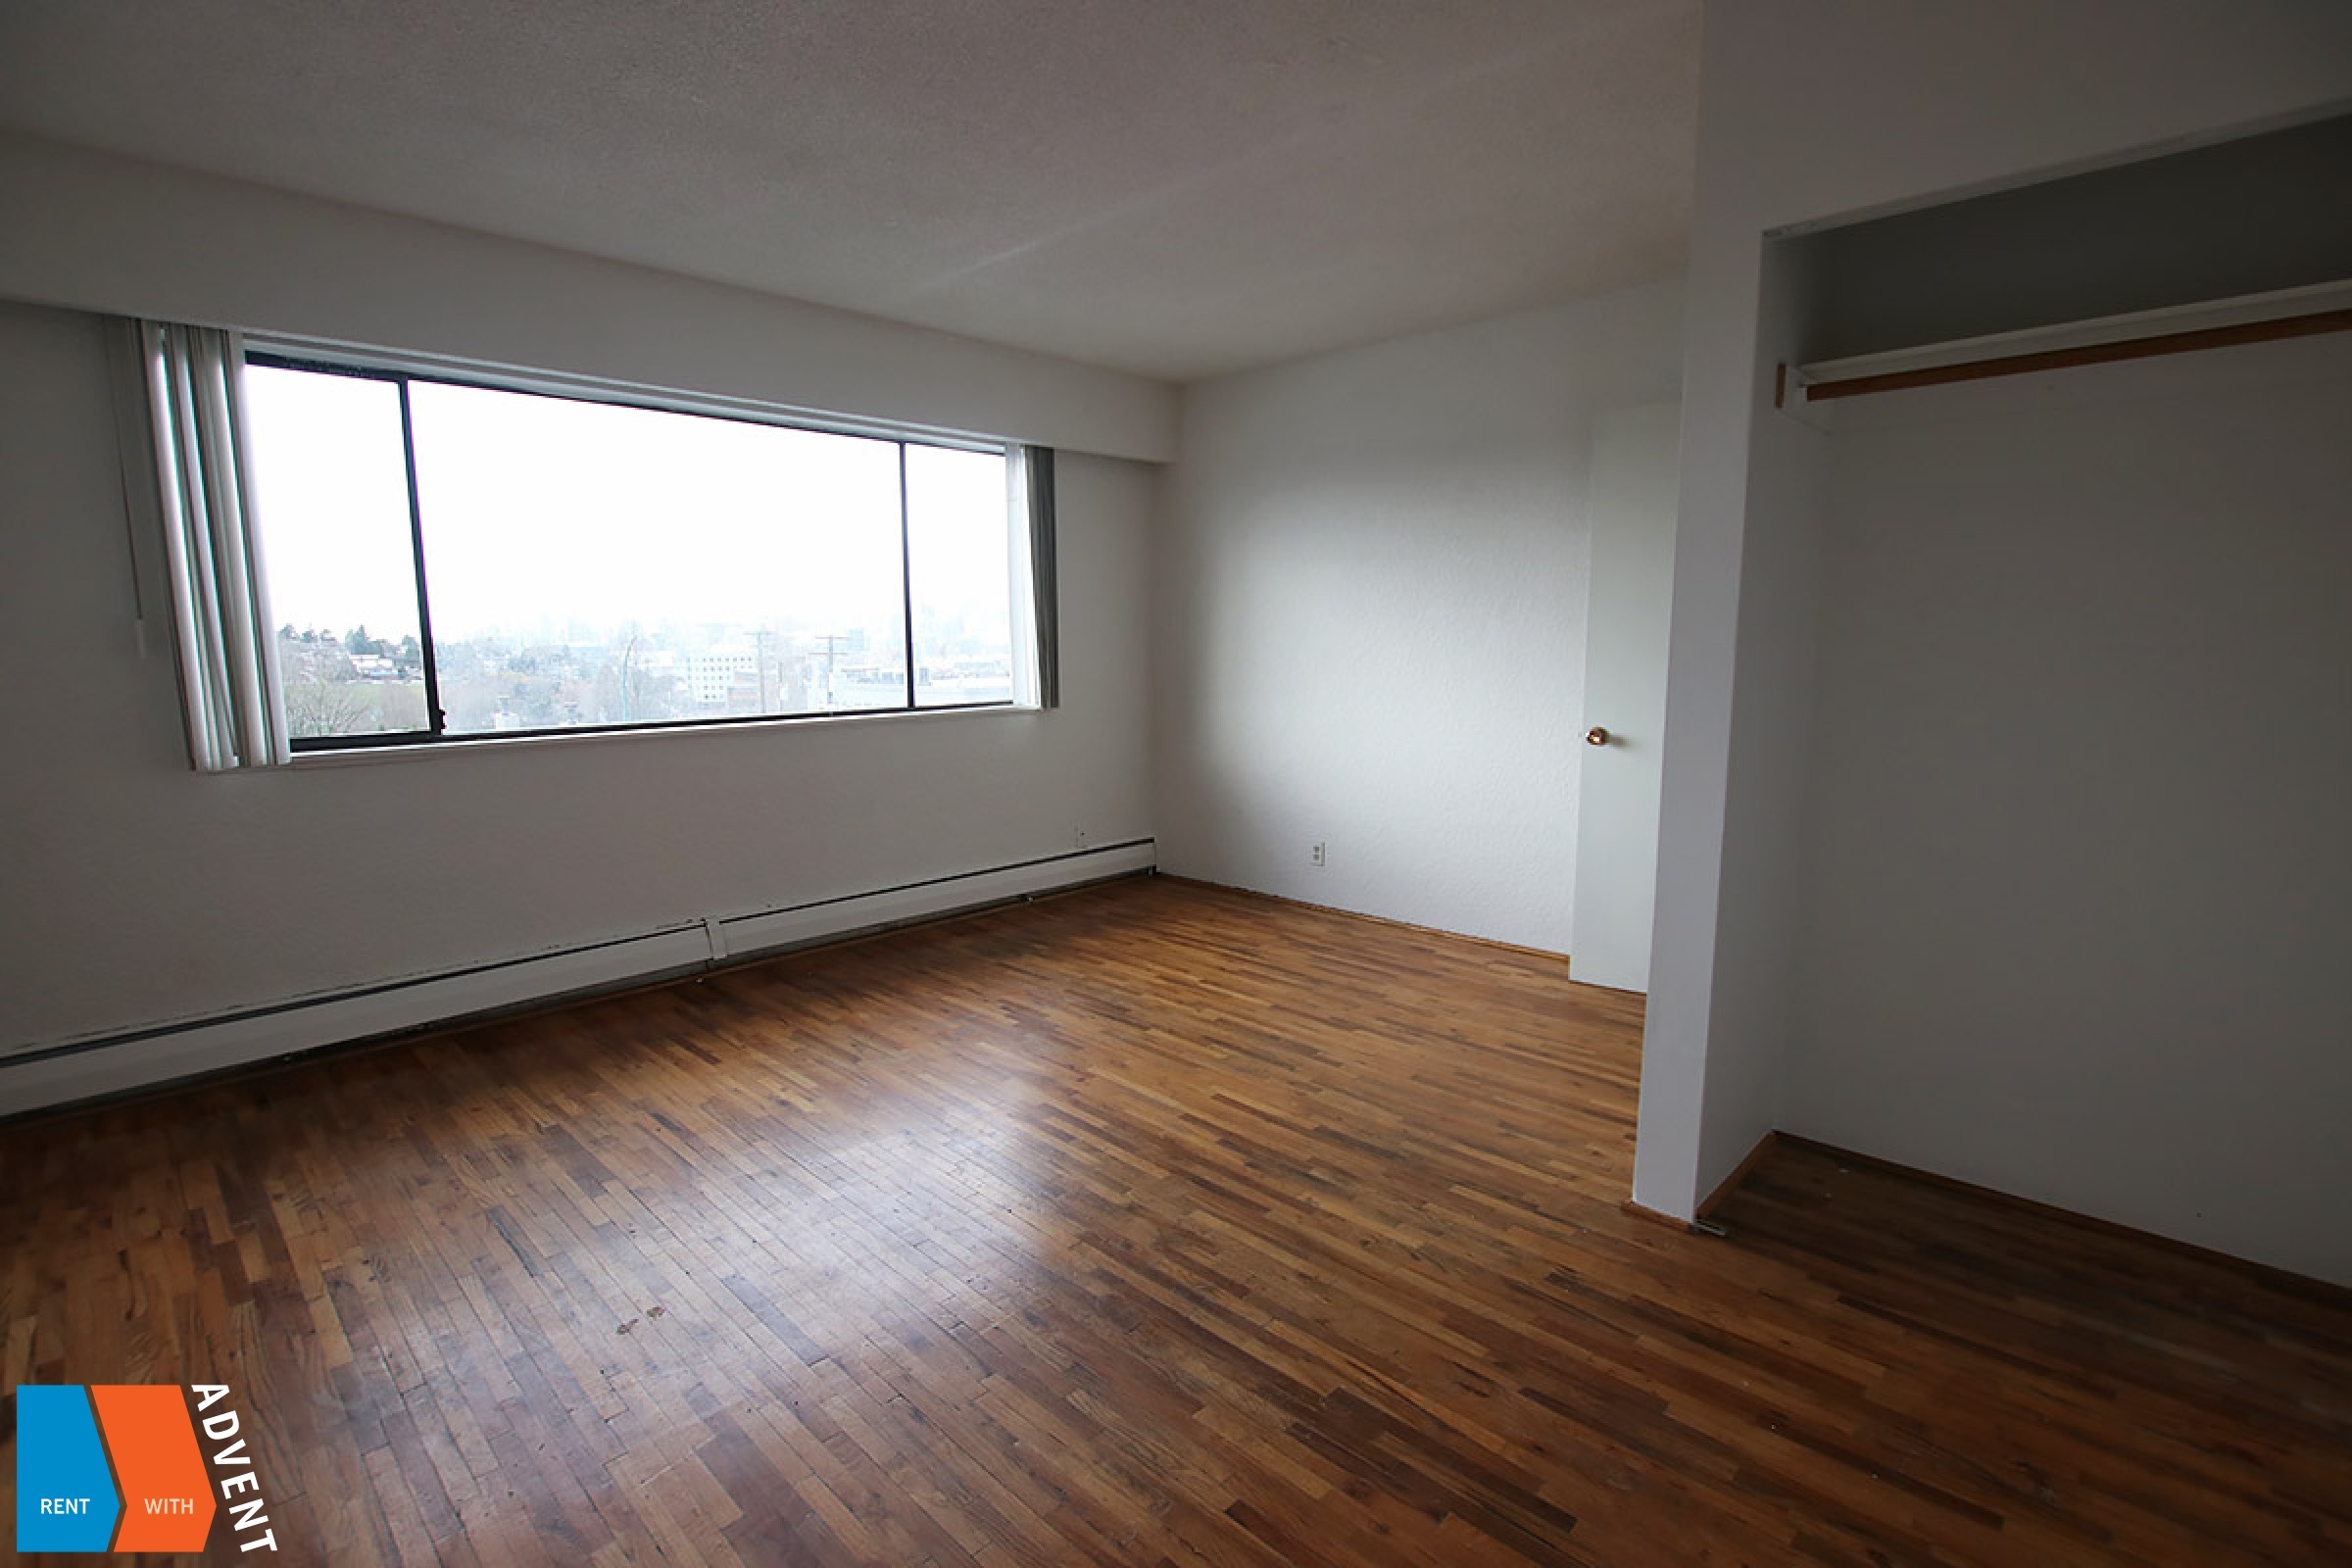 2308 Clark Unfurnished 2 Bedroom Apartment Rental in East Vancouver, Close to Commercial Drive. 6 - 2308 Clark Drive, Vancouver, BC, Canada.